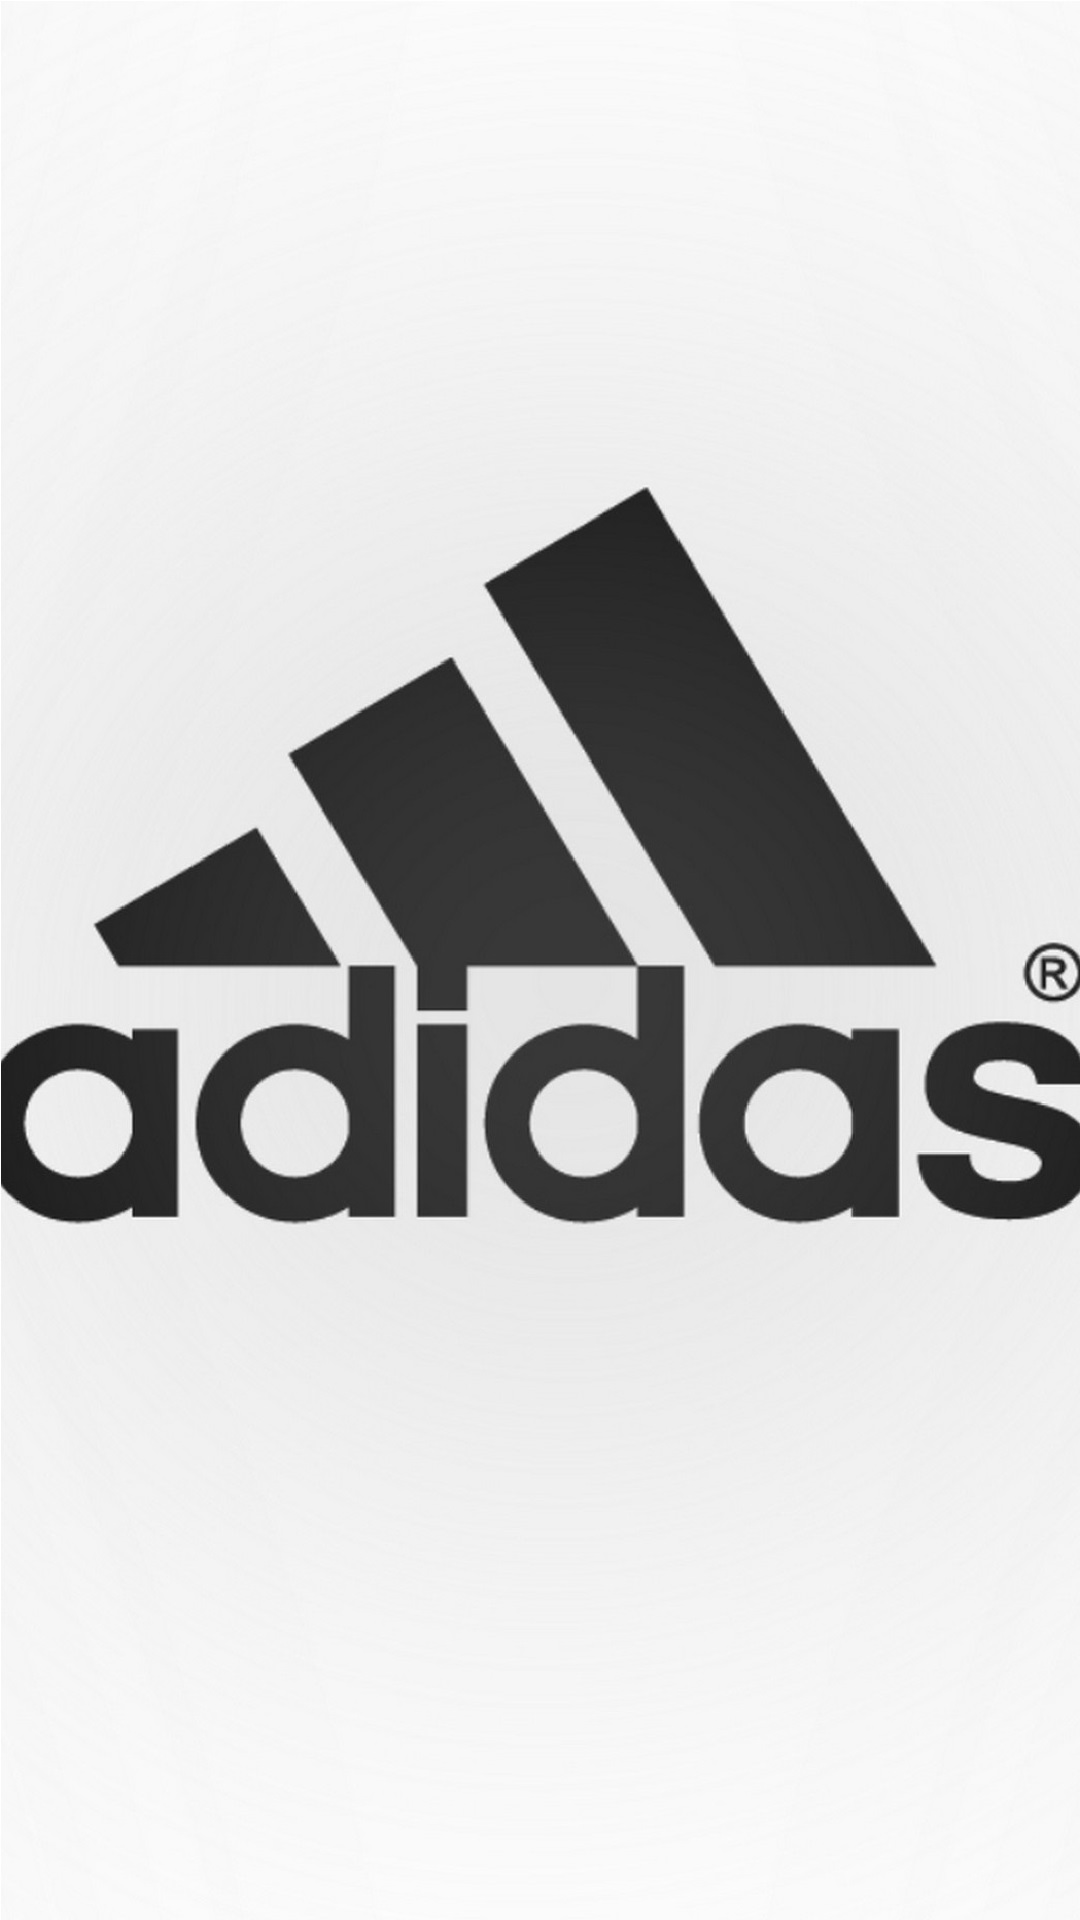 Detail Adidas Wallpaper For Android Nomer 18